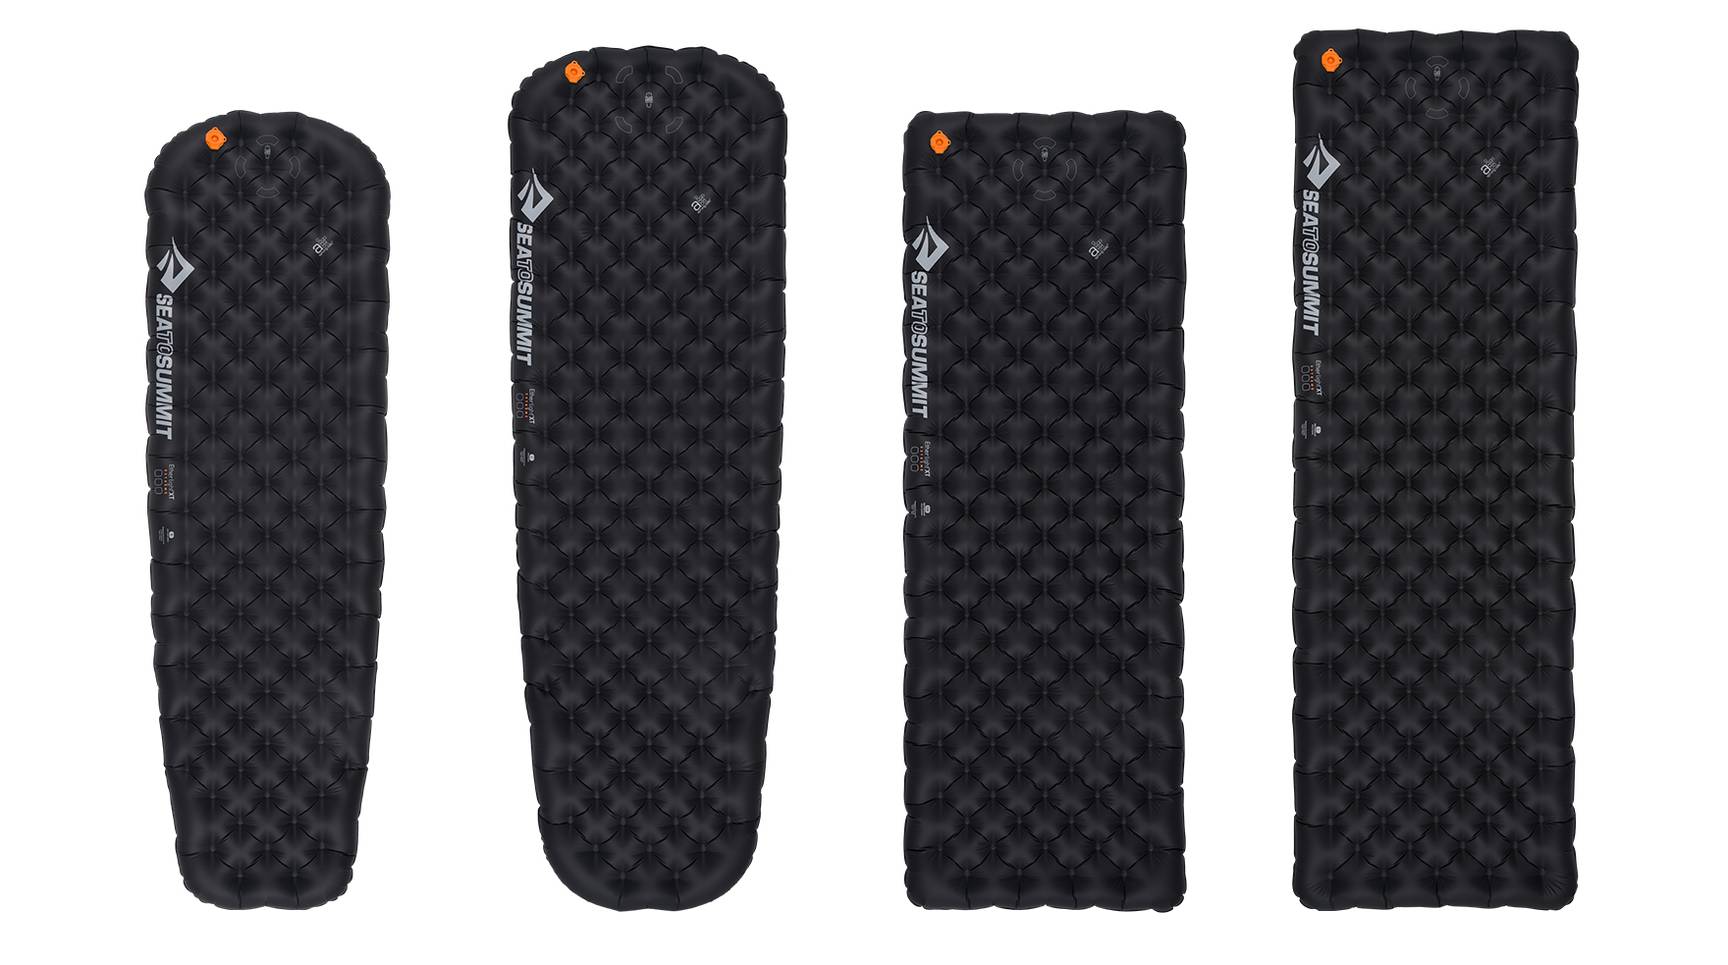 Ether Light XT Extreme Insulated Air Sleeping Pad | Sea to Summit